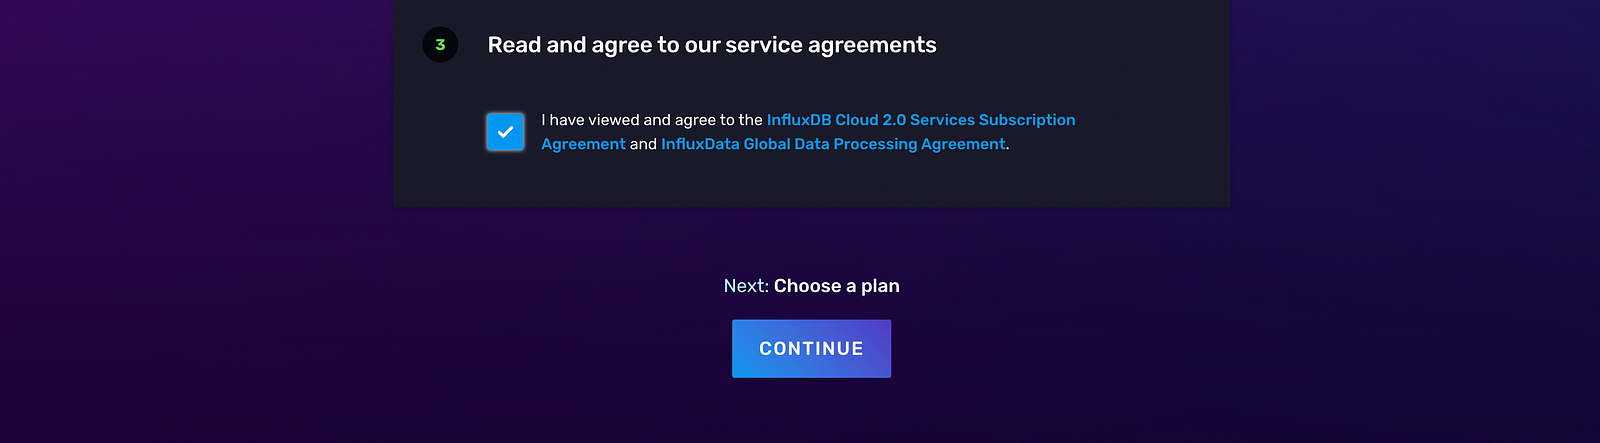 Service subscription agreement